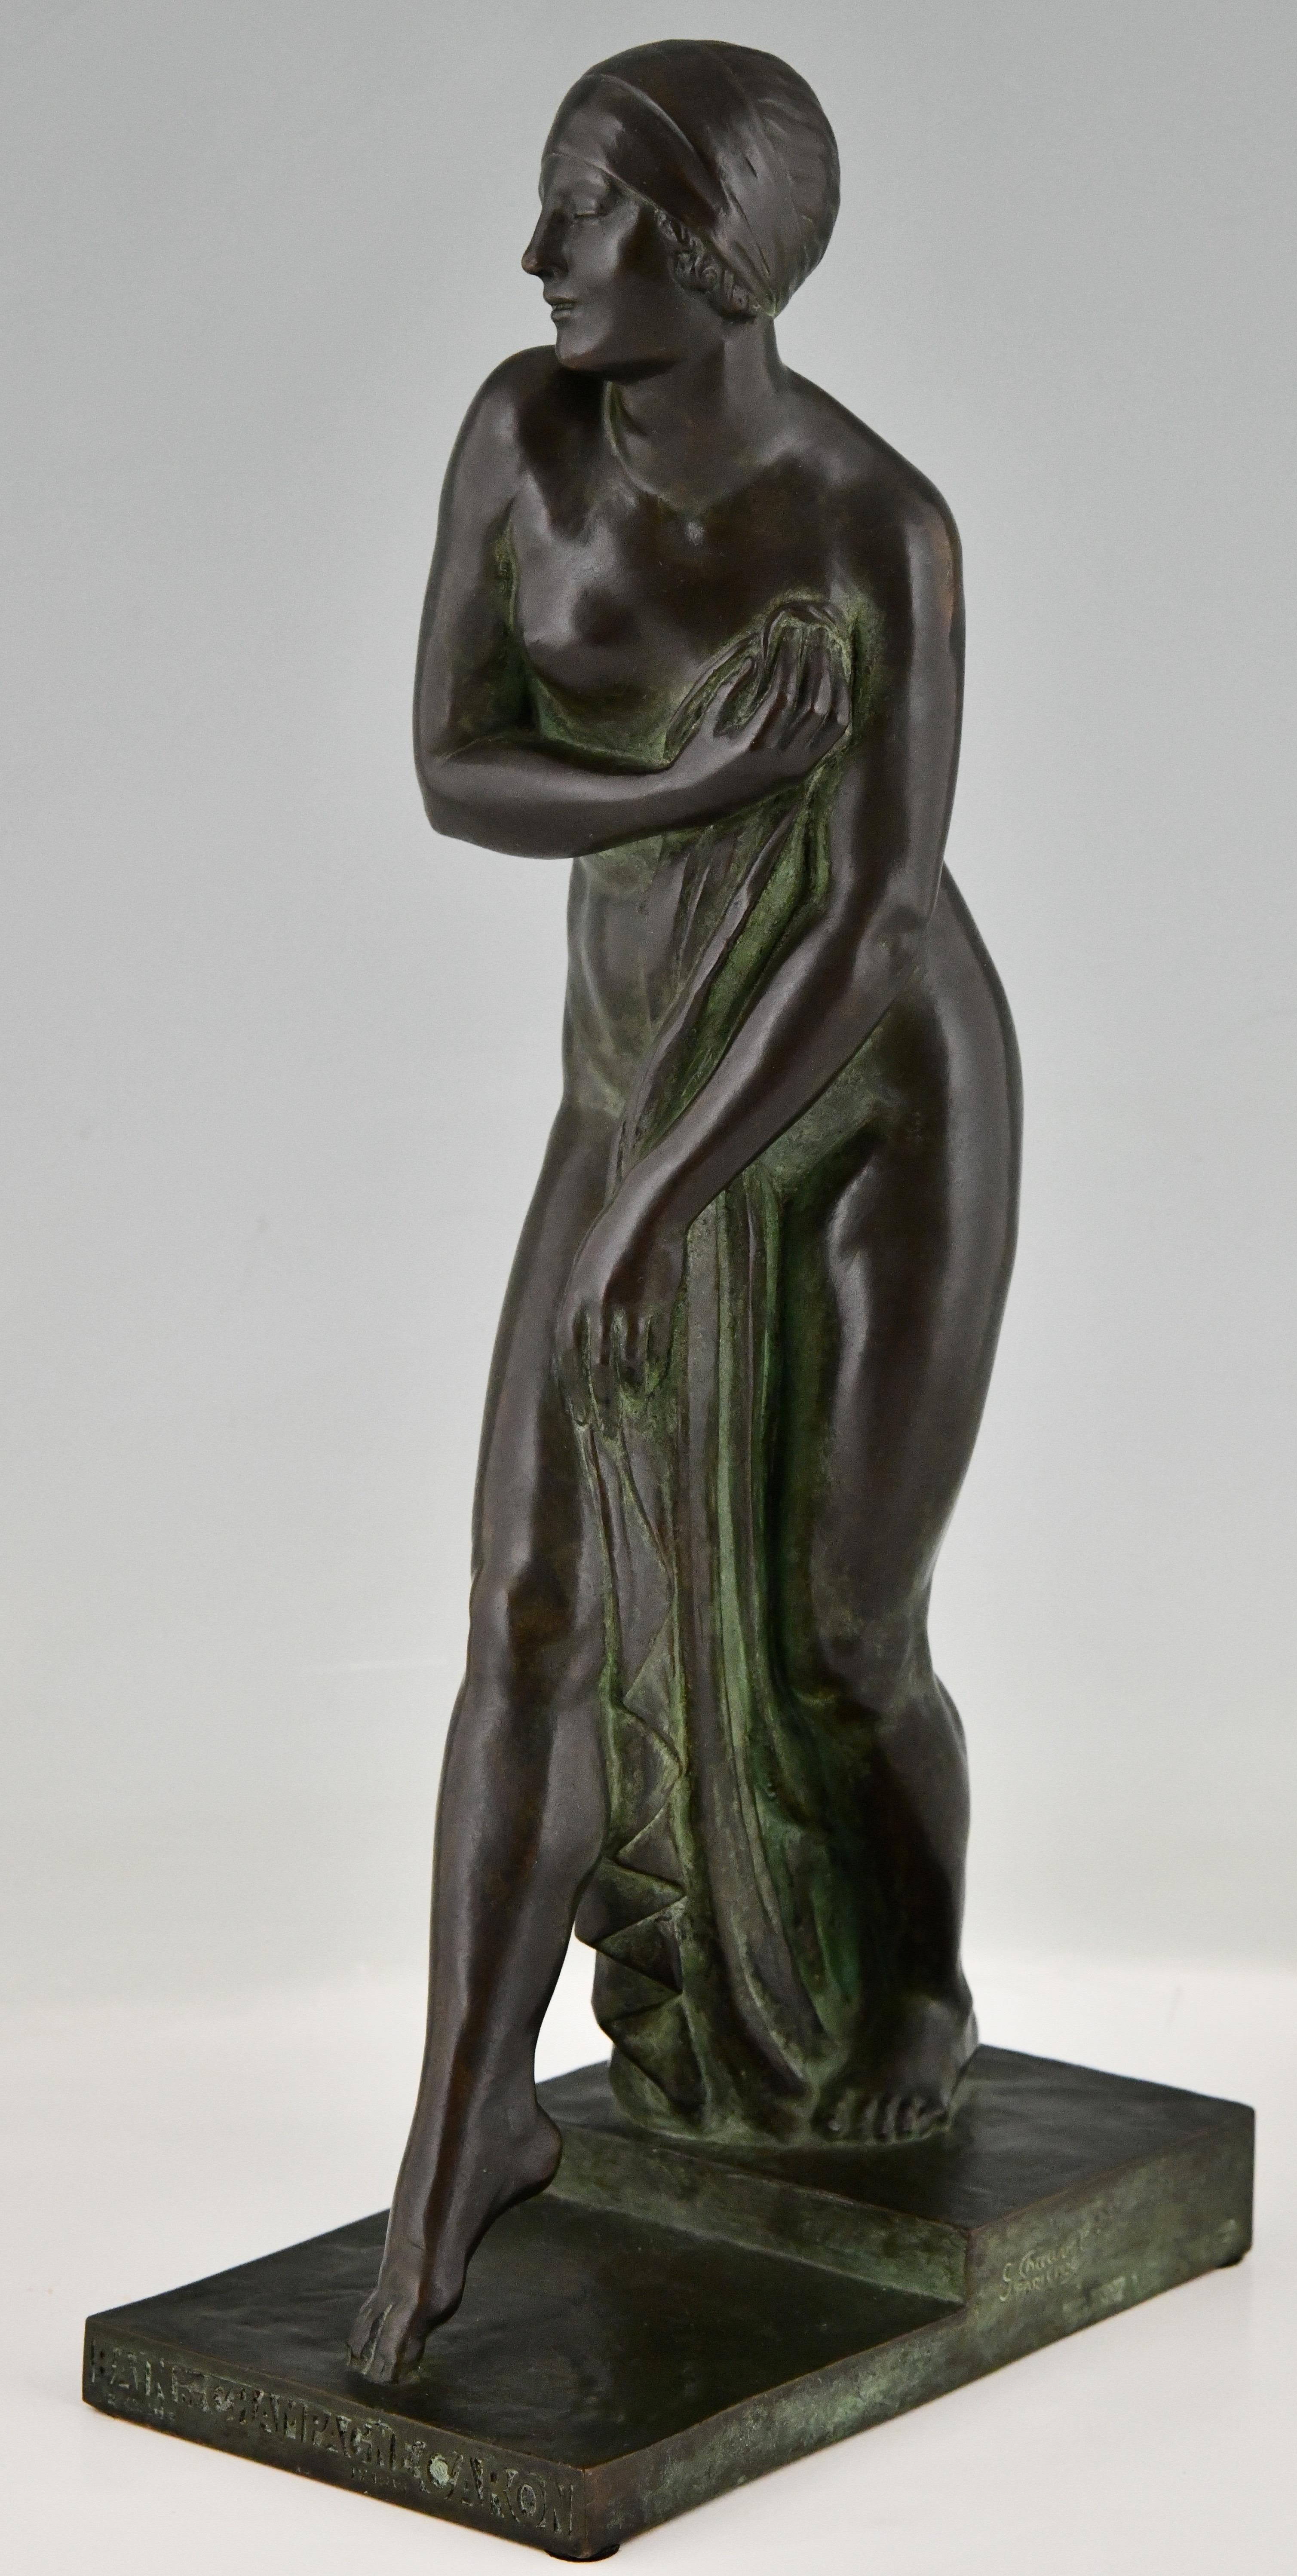 French Art Deco Bronze Sculpture Bathing Nude Bain De Champagne by Georges Chauvel 1926 For Sale